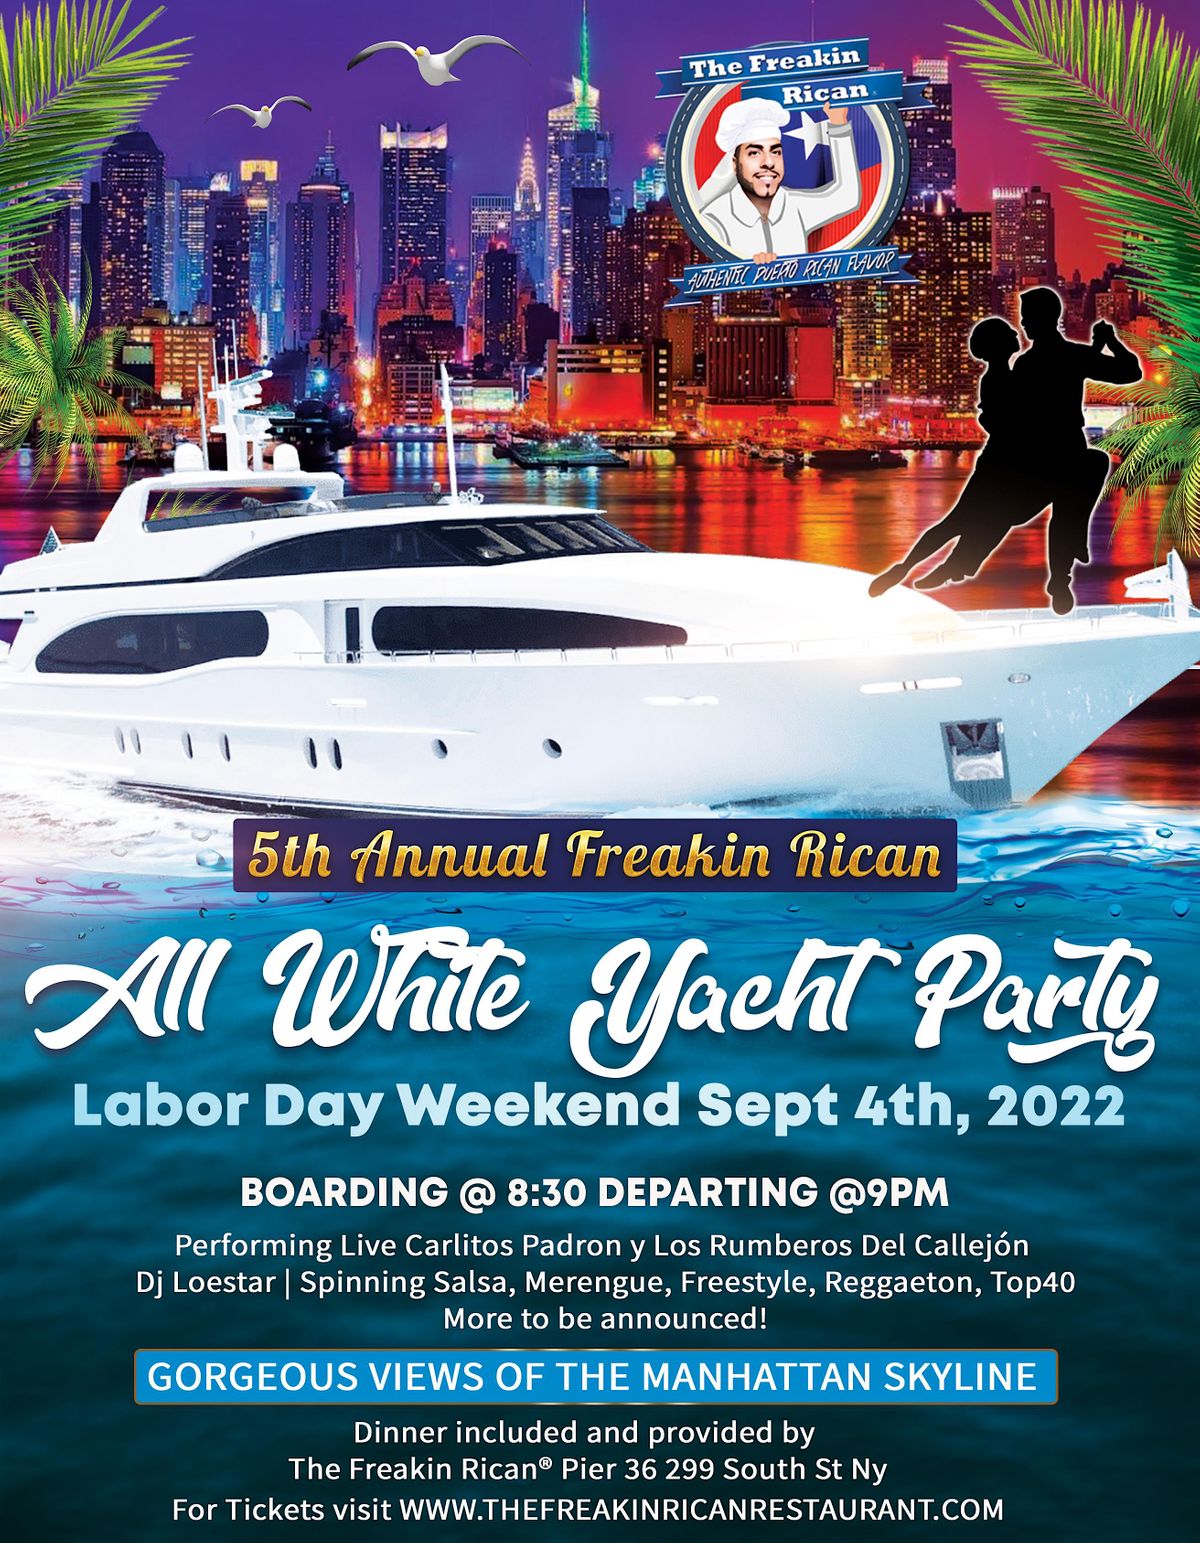 LABOR DAY WEEKEND PARTY CRUISE Pier 36 New York September 4 to